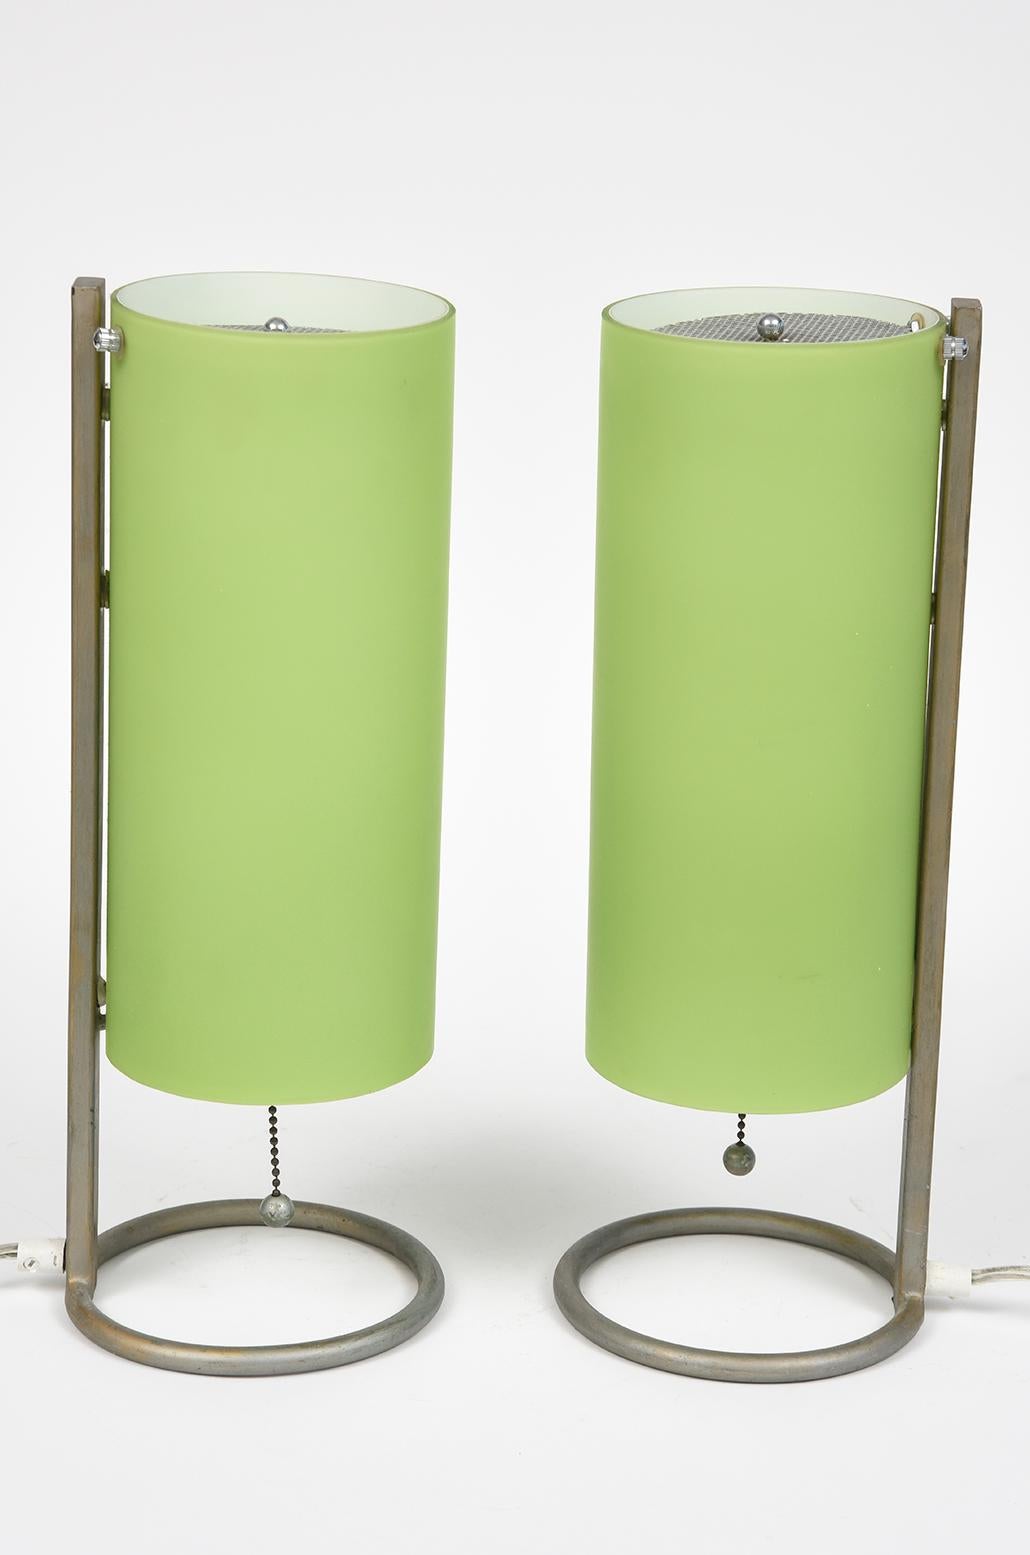 American Pair of 1950s Lamps from the Historic Fontainebleau Hotel in Miami Beach